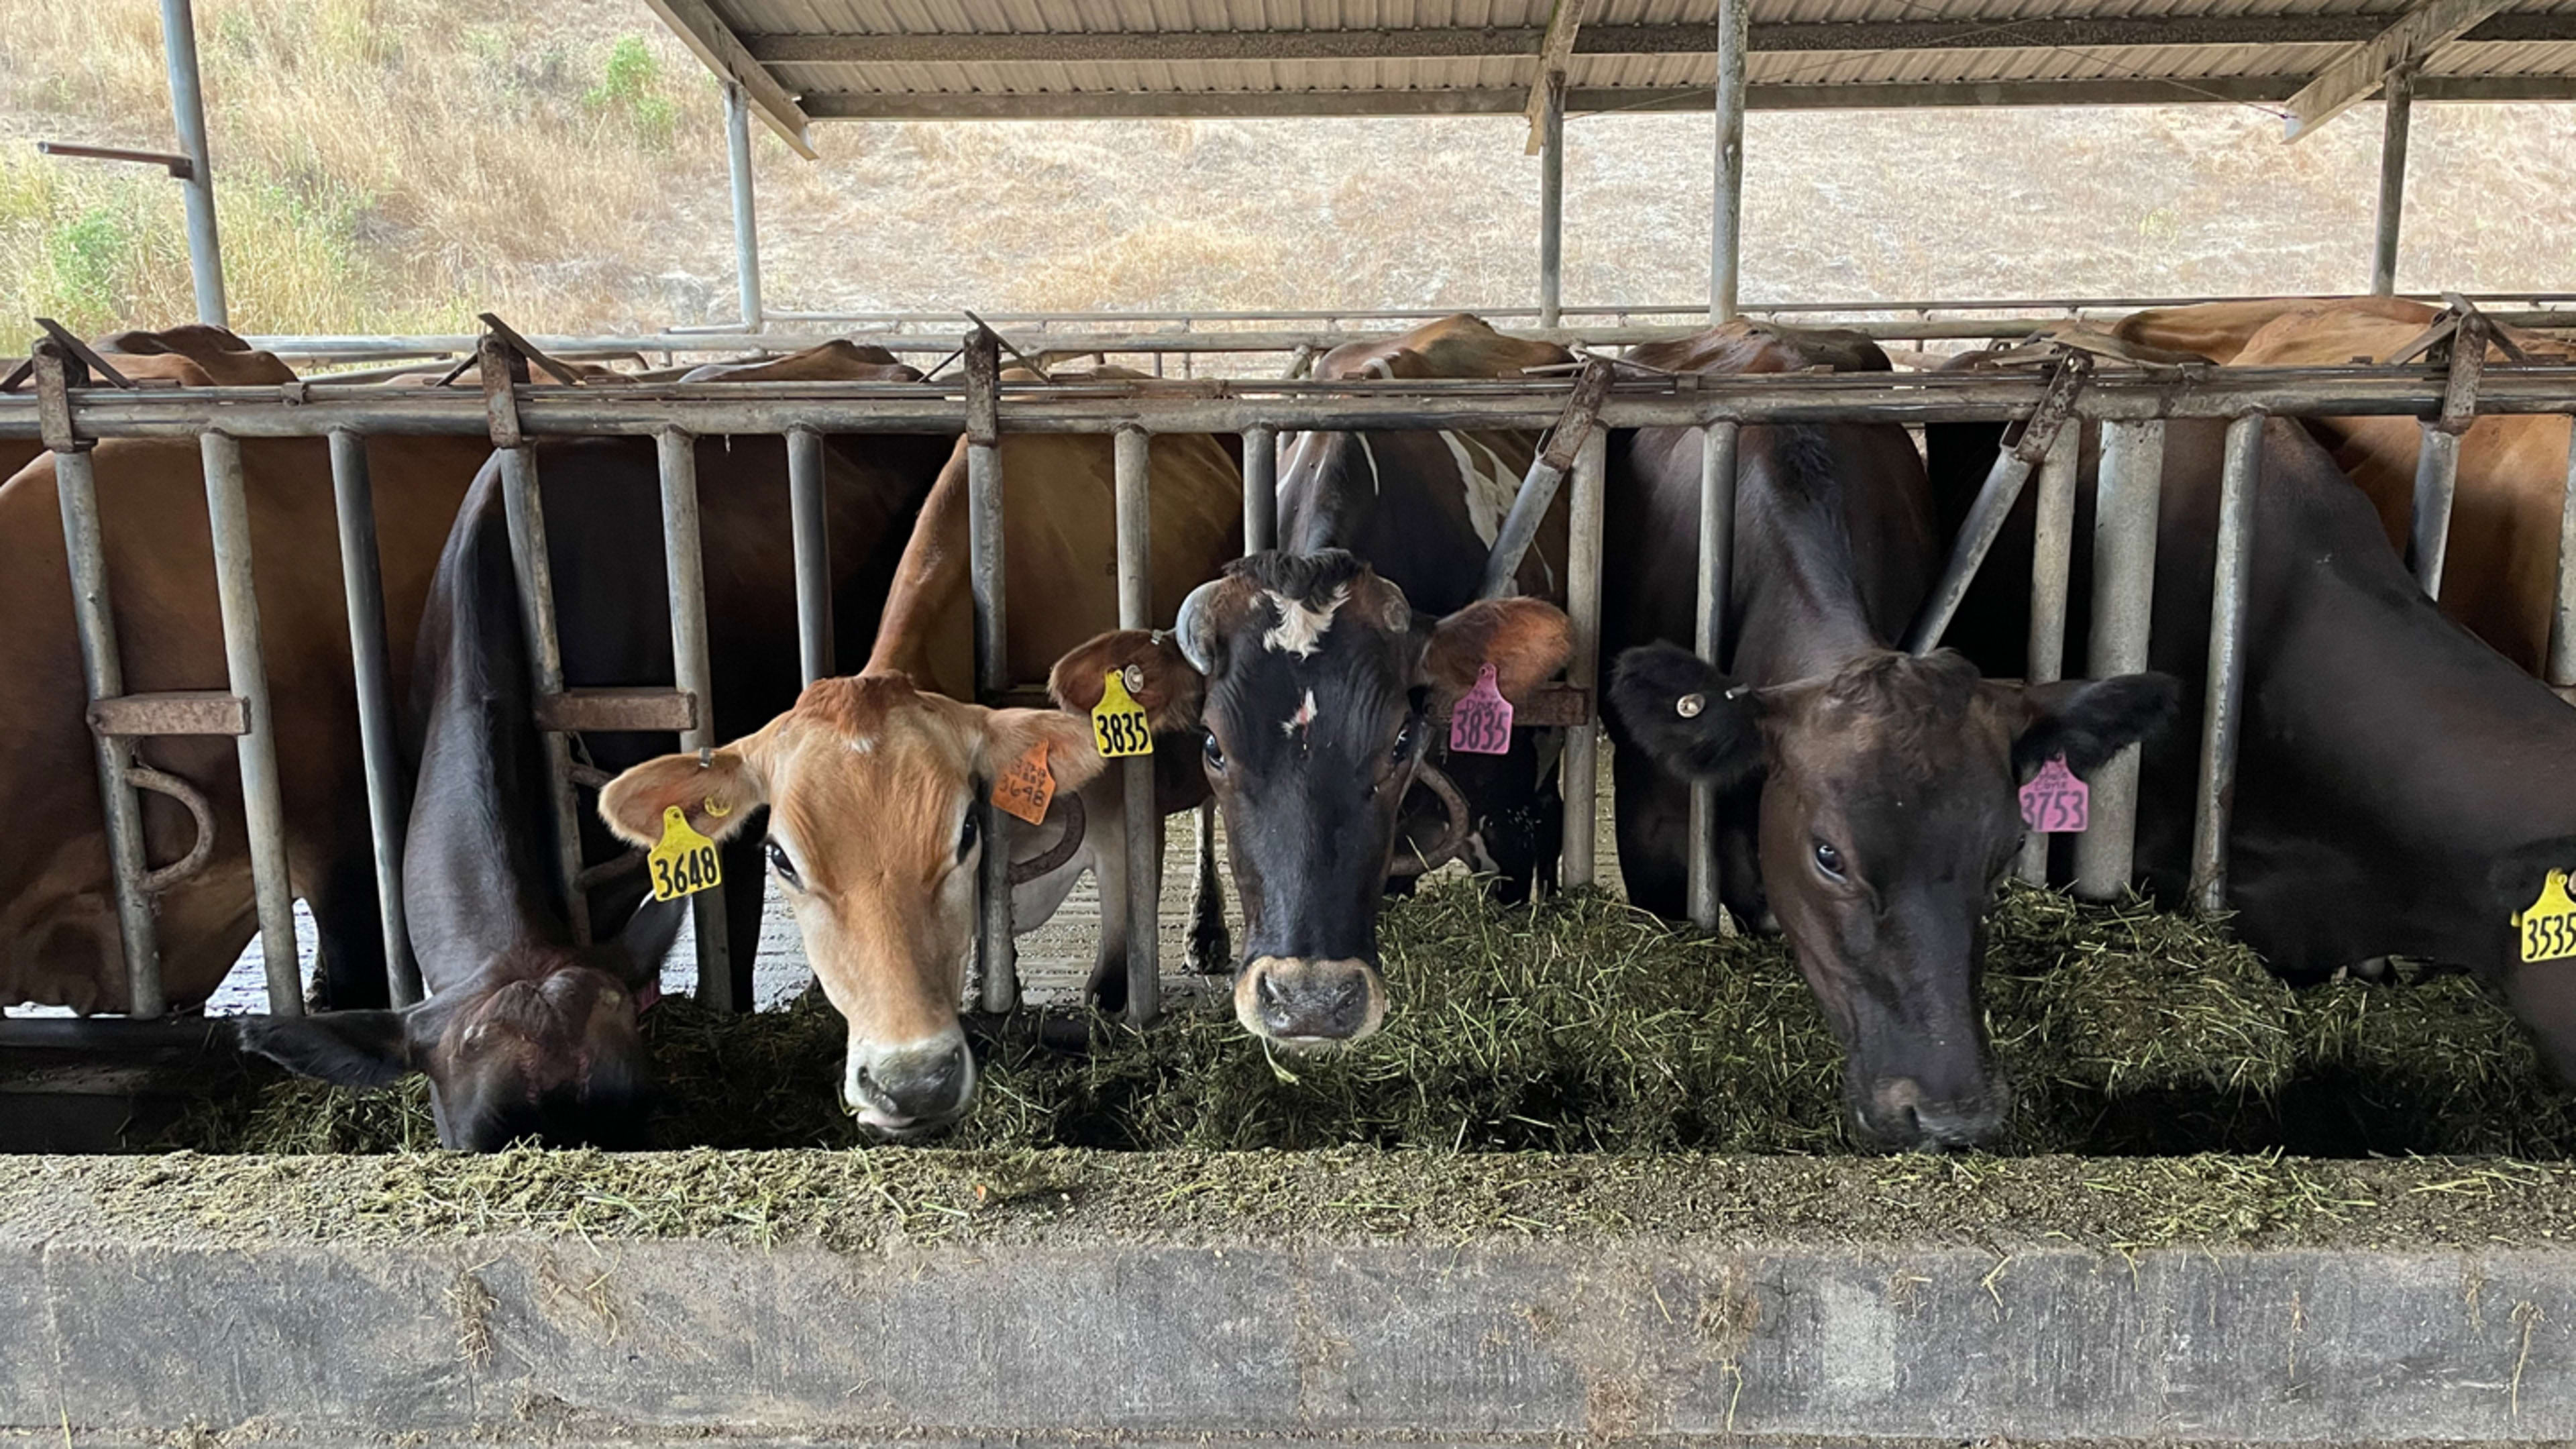 There’s a simple fix for the emissions in cow’s burps: Just give them a little seaweed